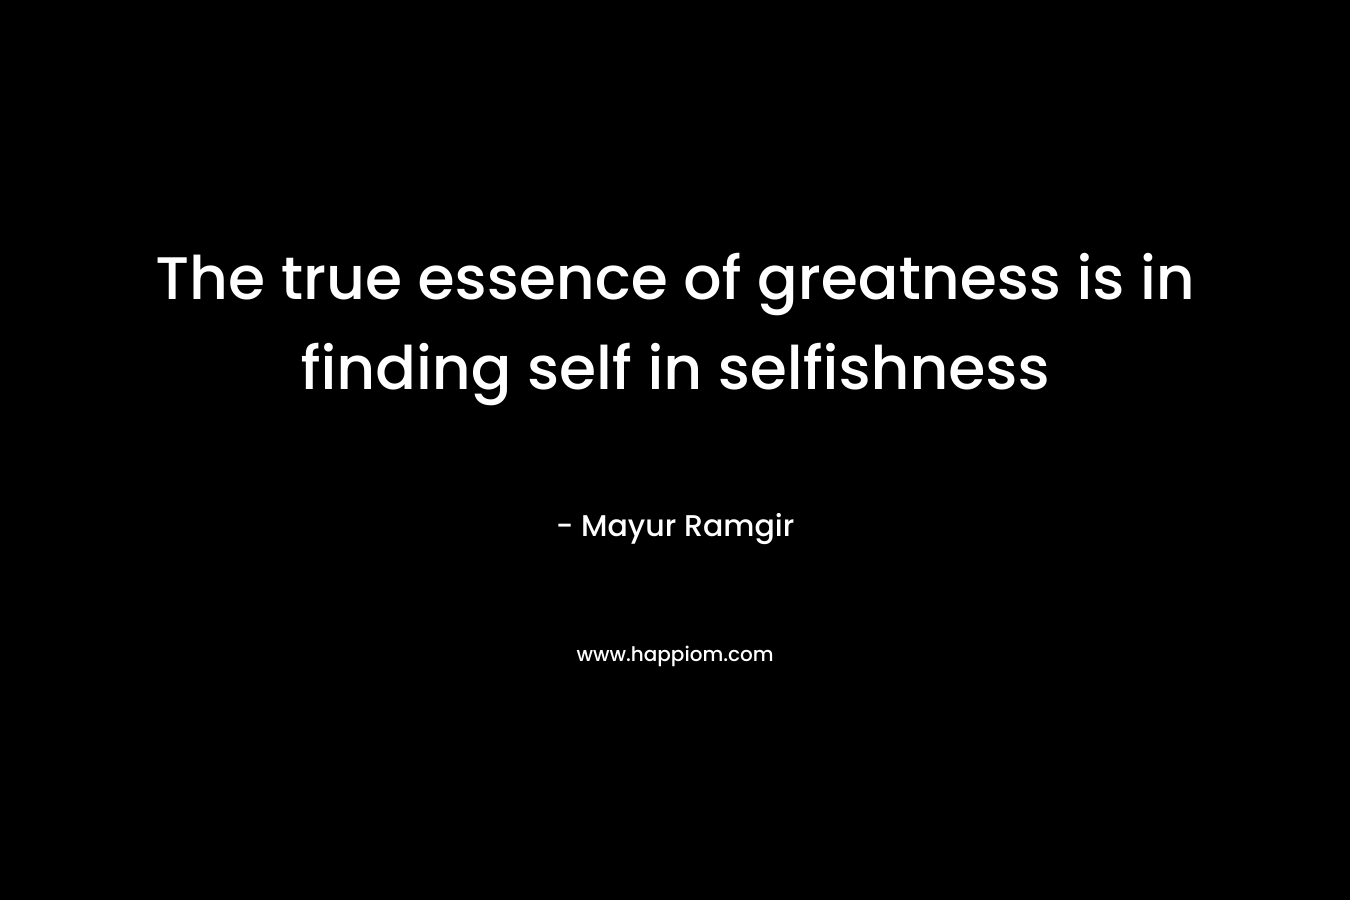 The true essence of greatness is in finding self in selfishness